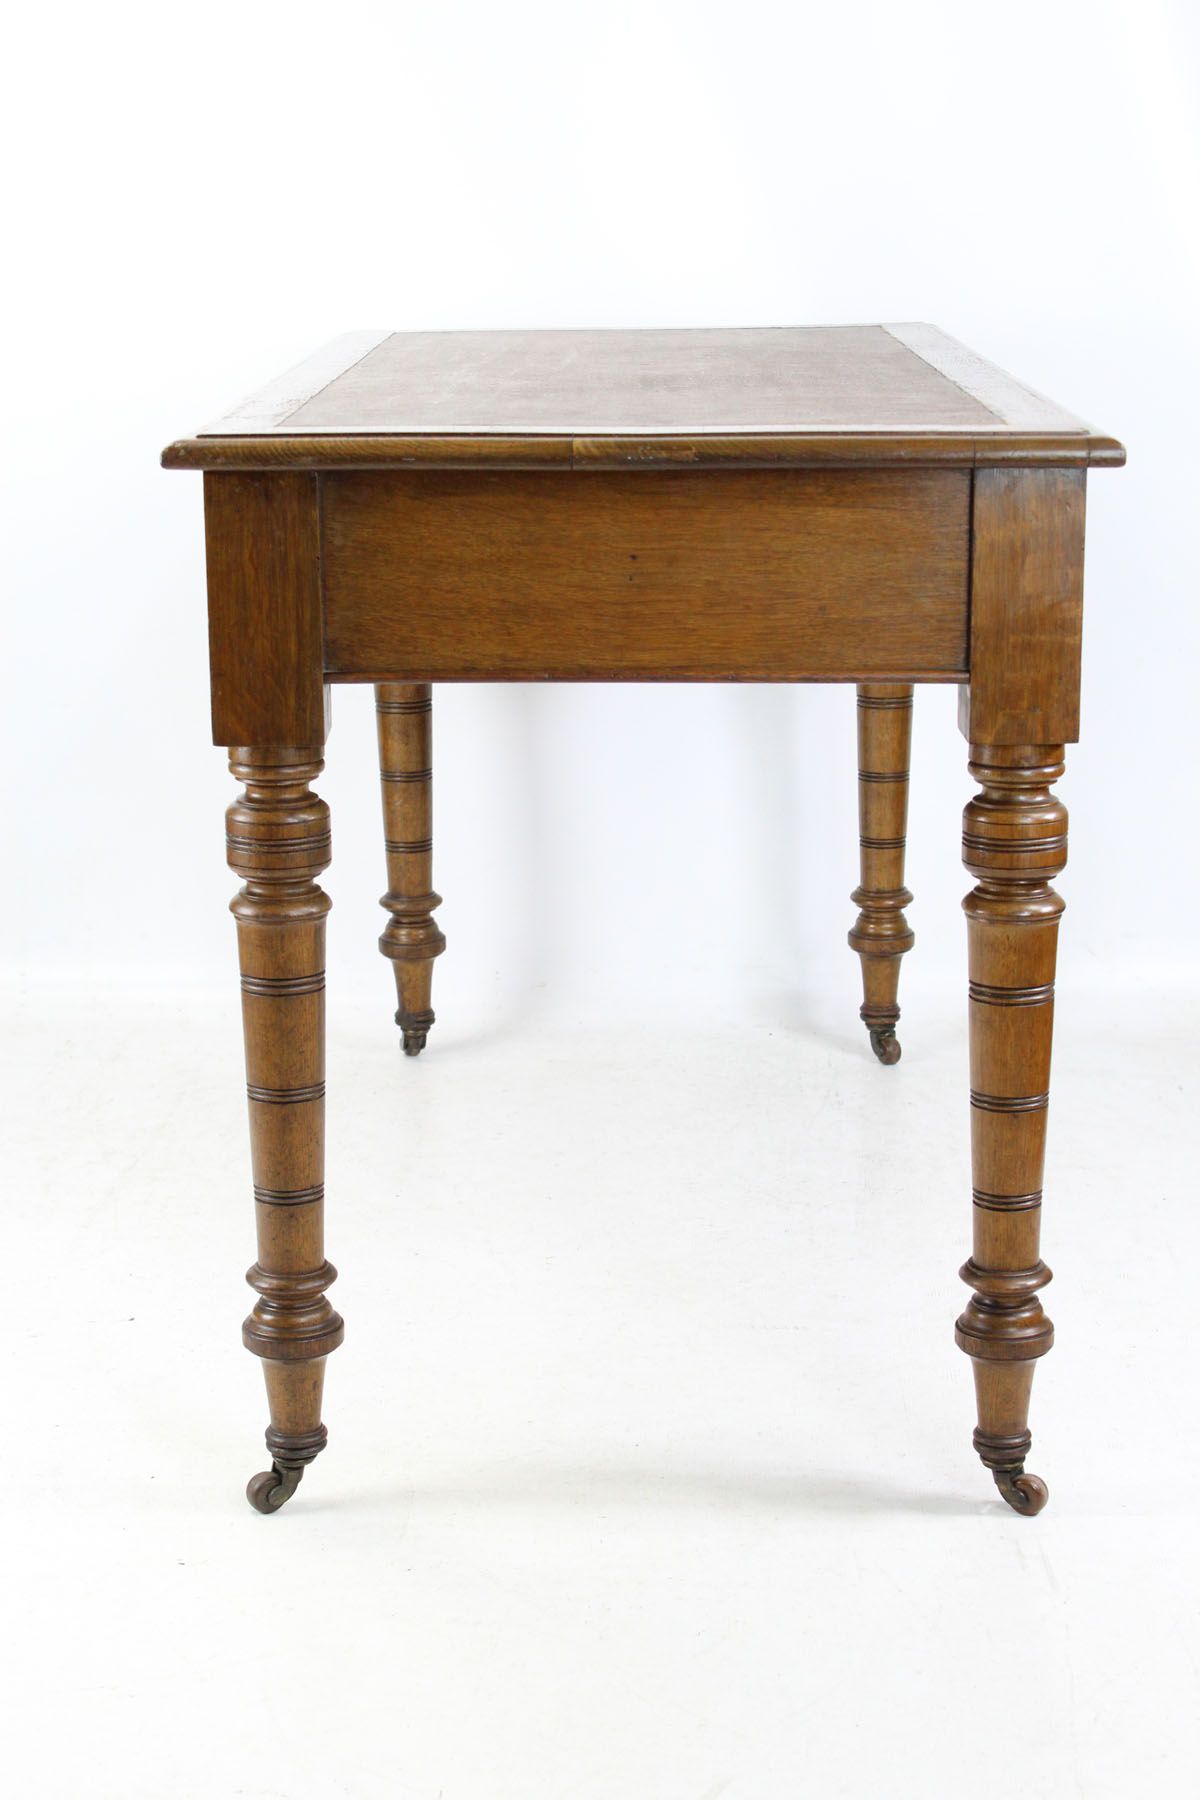 Antique Victorian Oak Desk / Writing Table With Regard To Reclaimed Oak Leaning Writing Desks (View 8 of 15)